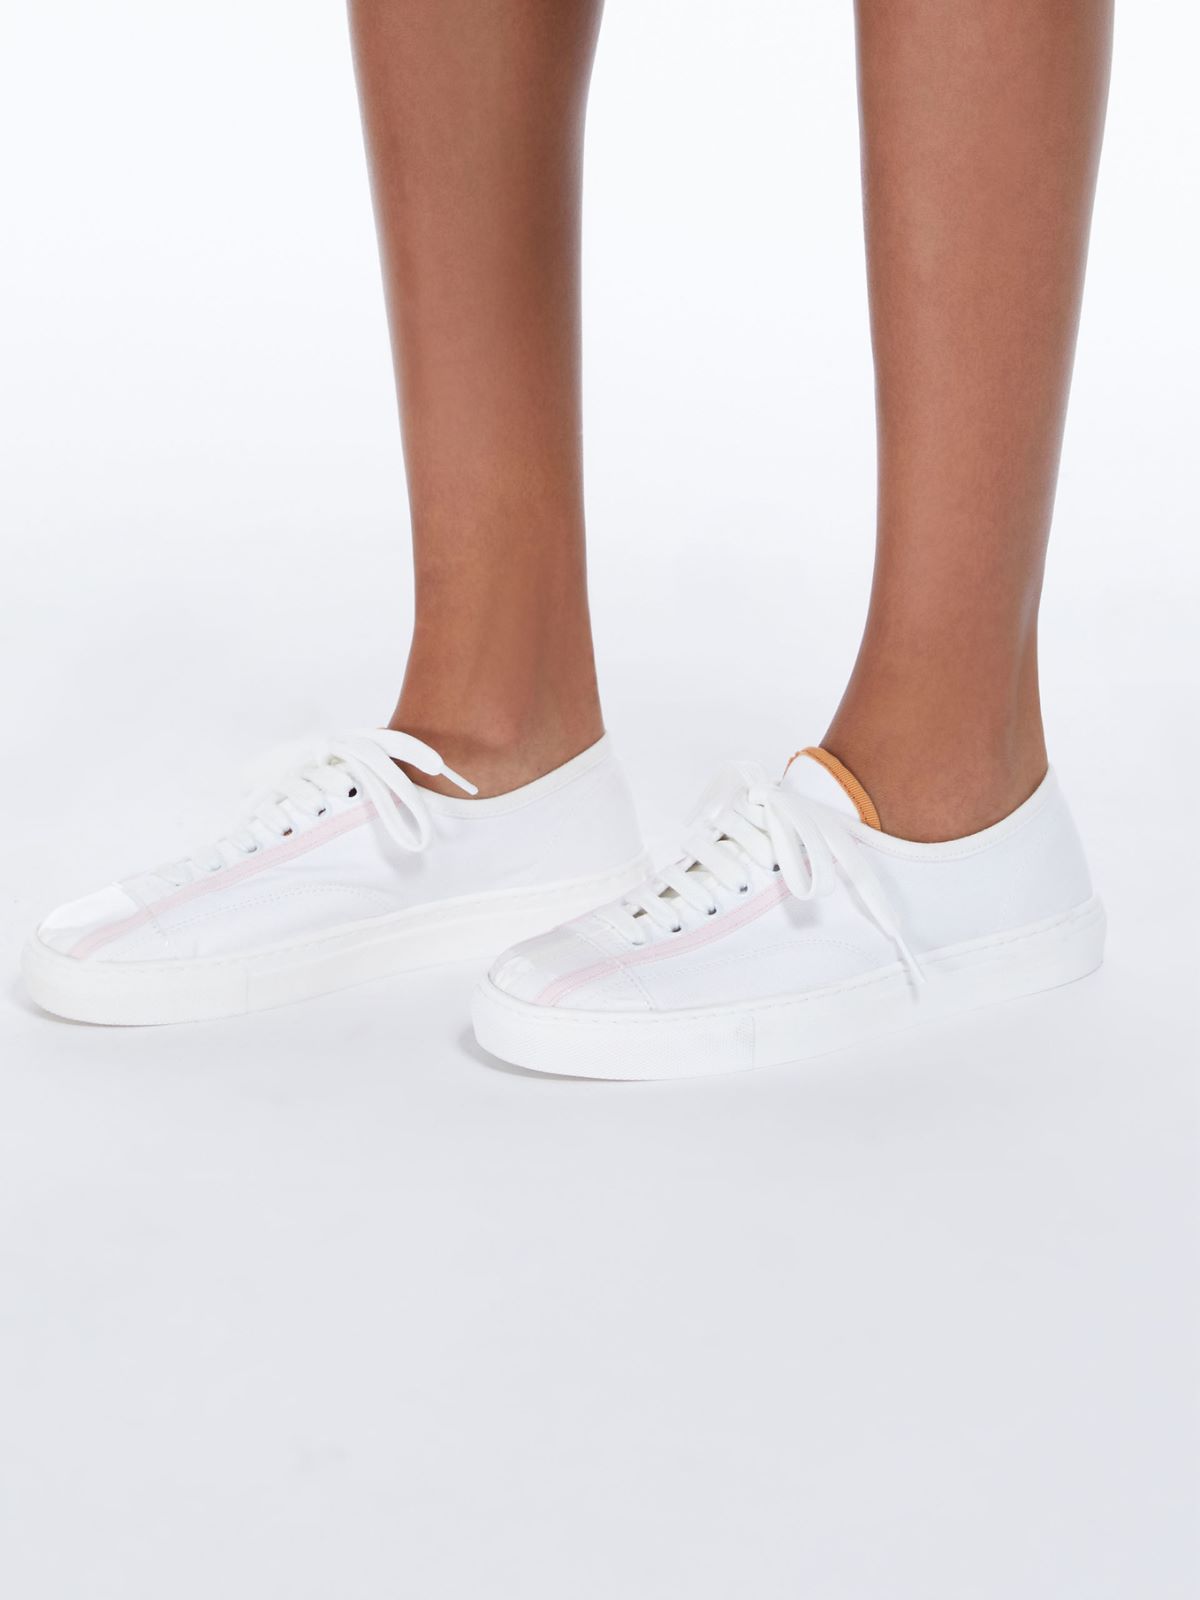 Cotton canvas sneakers, white | Weekend Max Mara